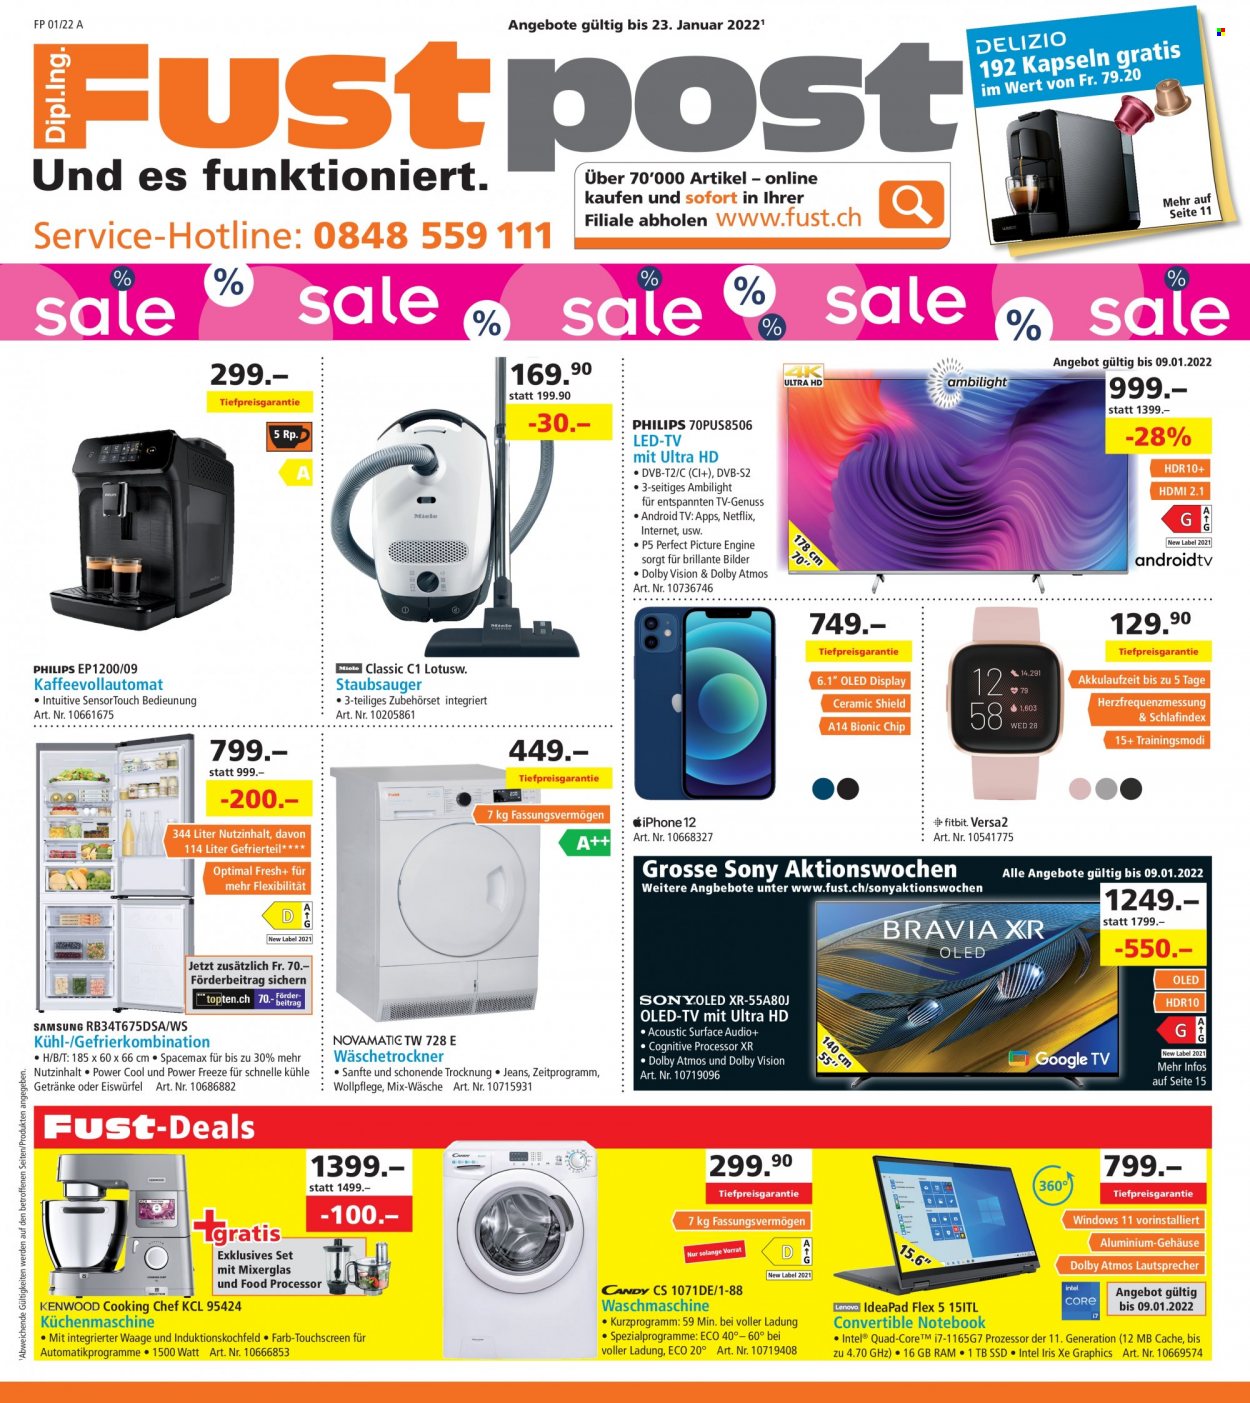 Catalogue Fust - 26.12.2021 - 23.1.2022. Page 1.